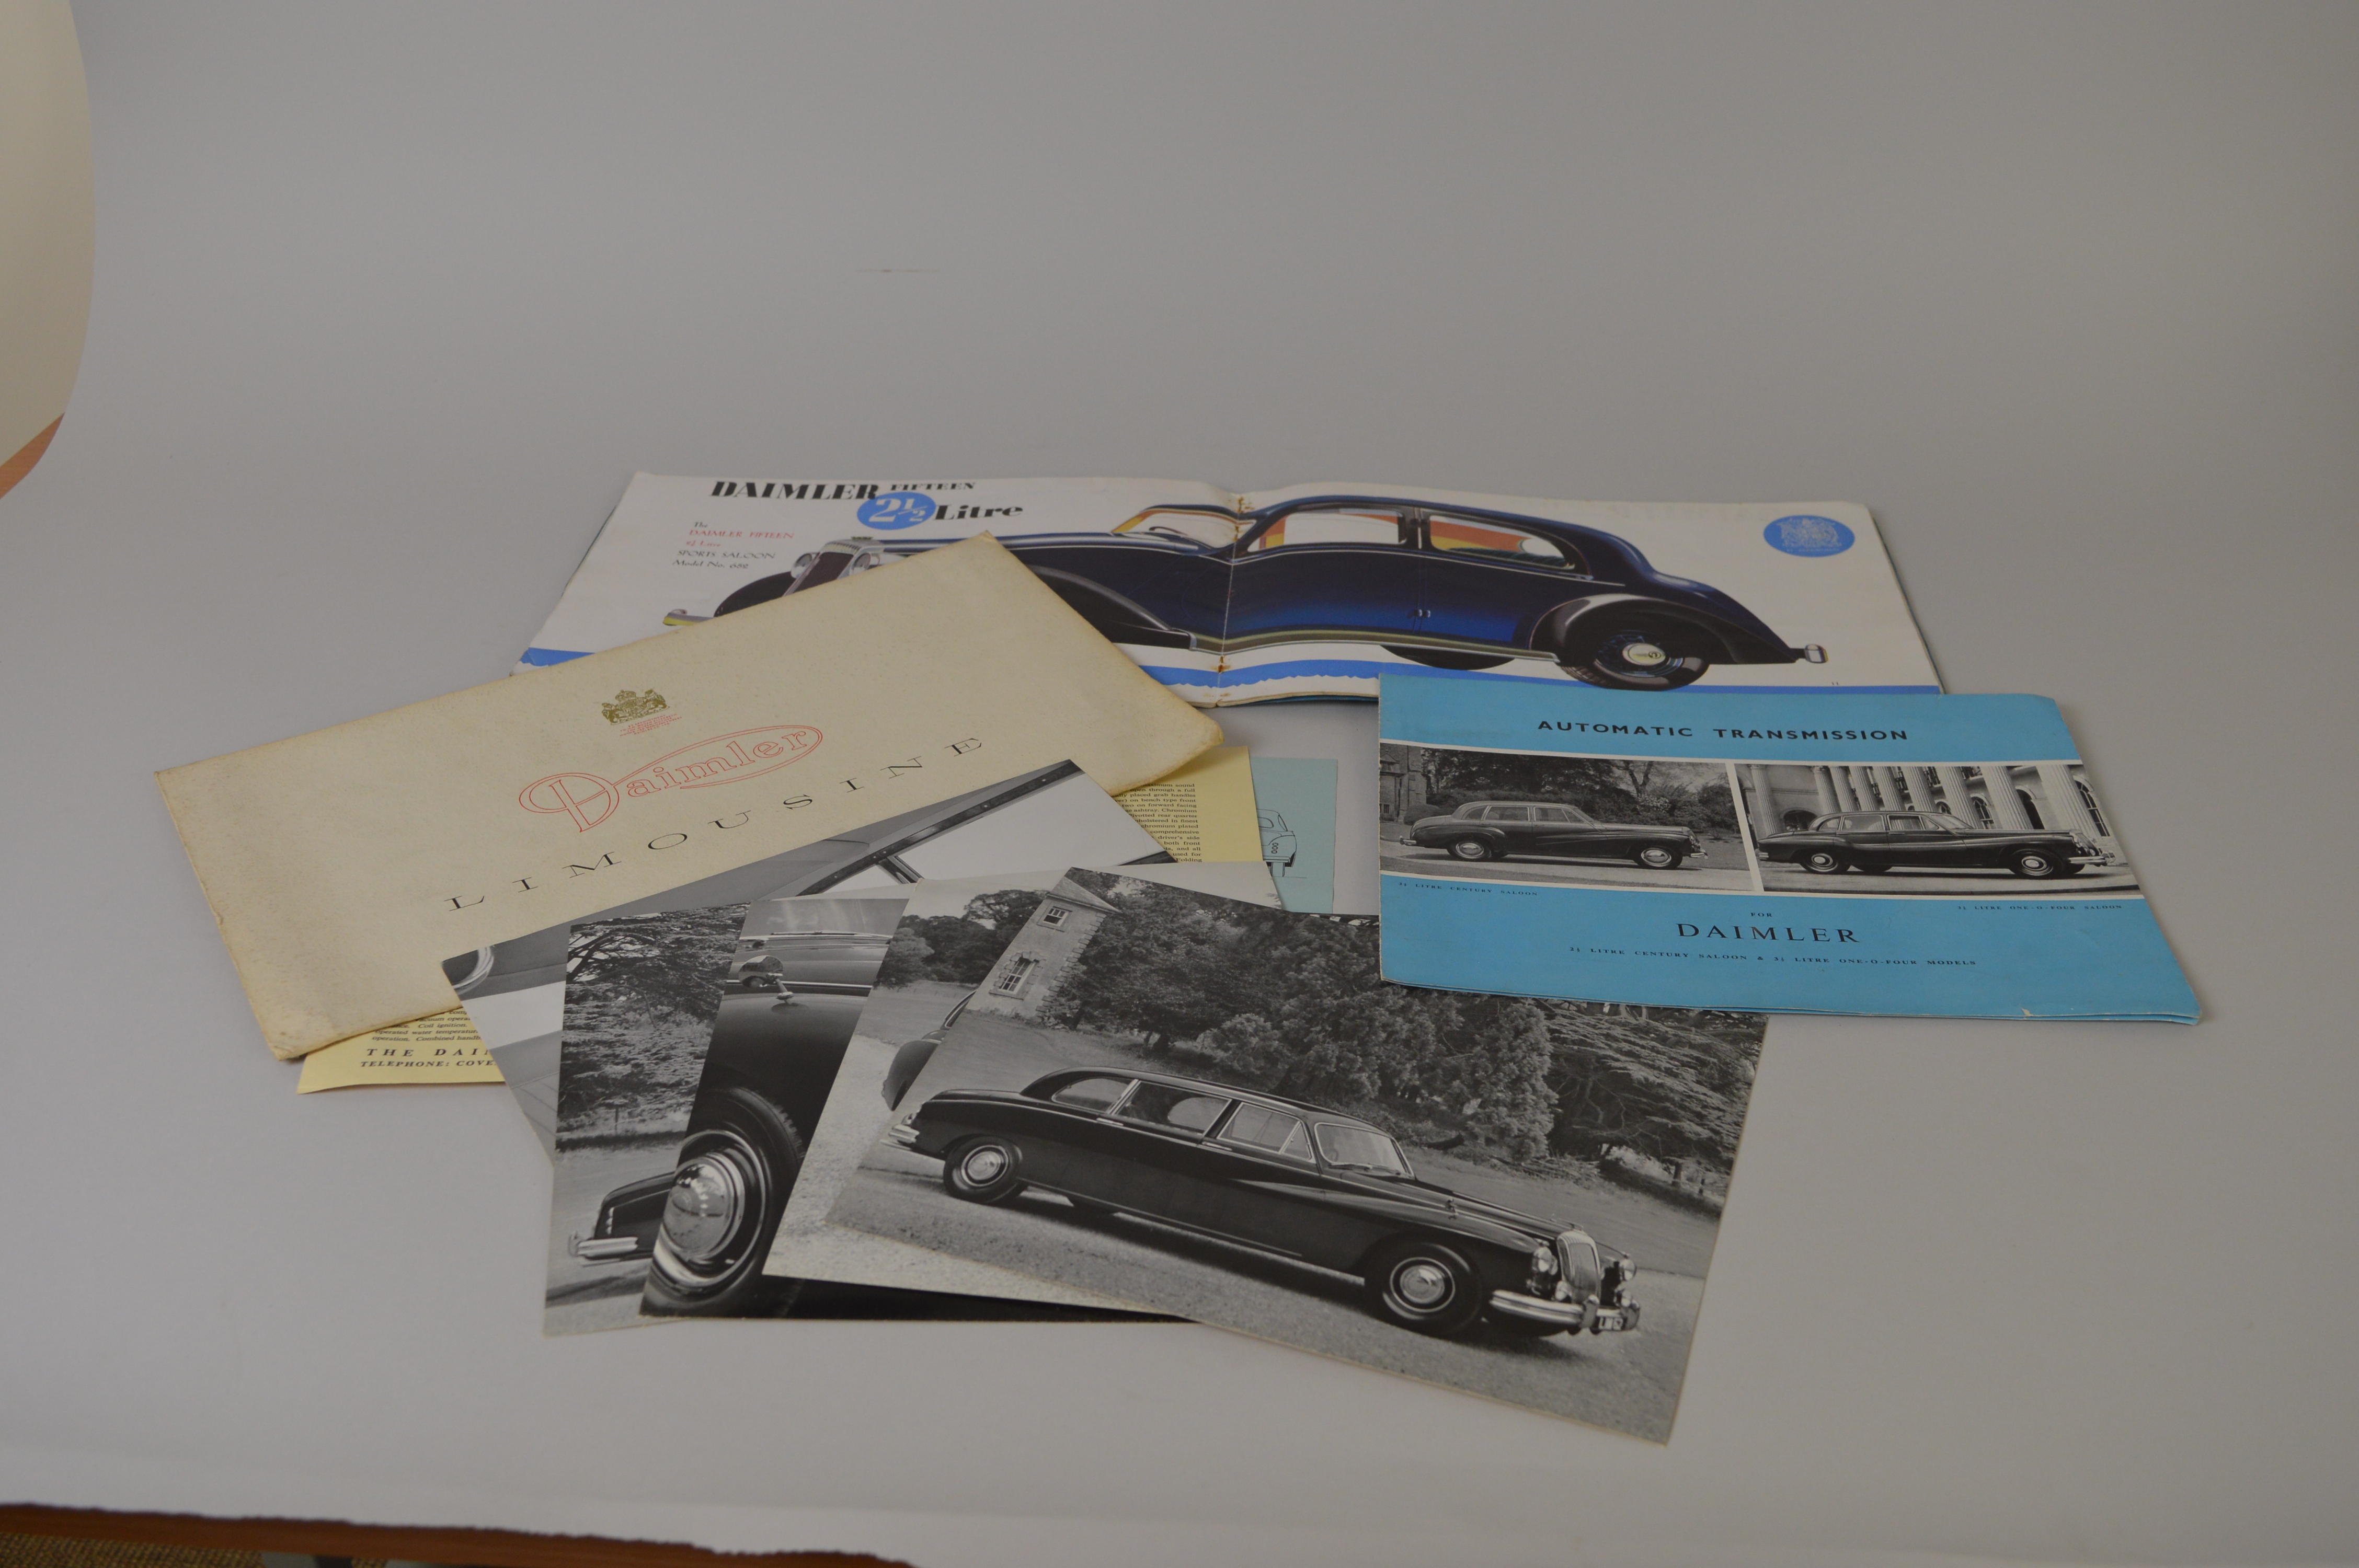 A 20-page Brochure on the Daimler 15hp 2 1/2-litre plus a  press pack with photos of the Daimler